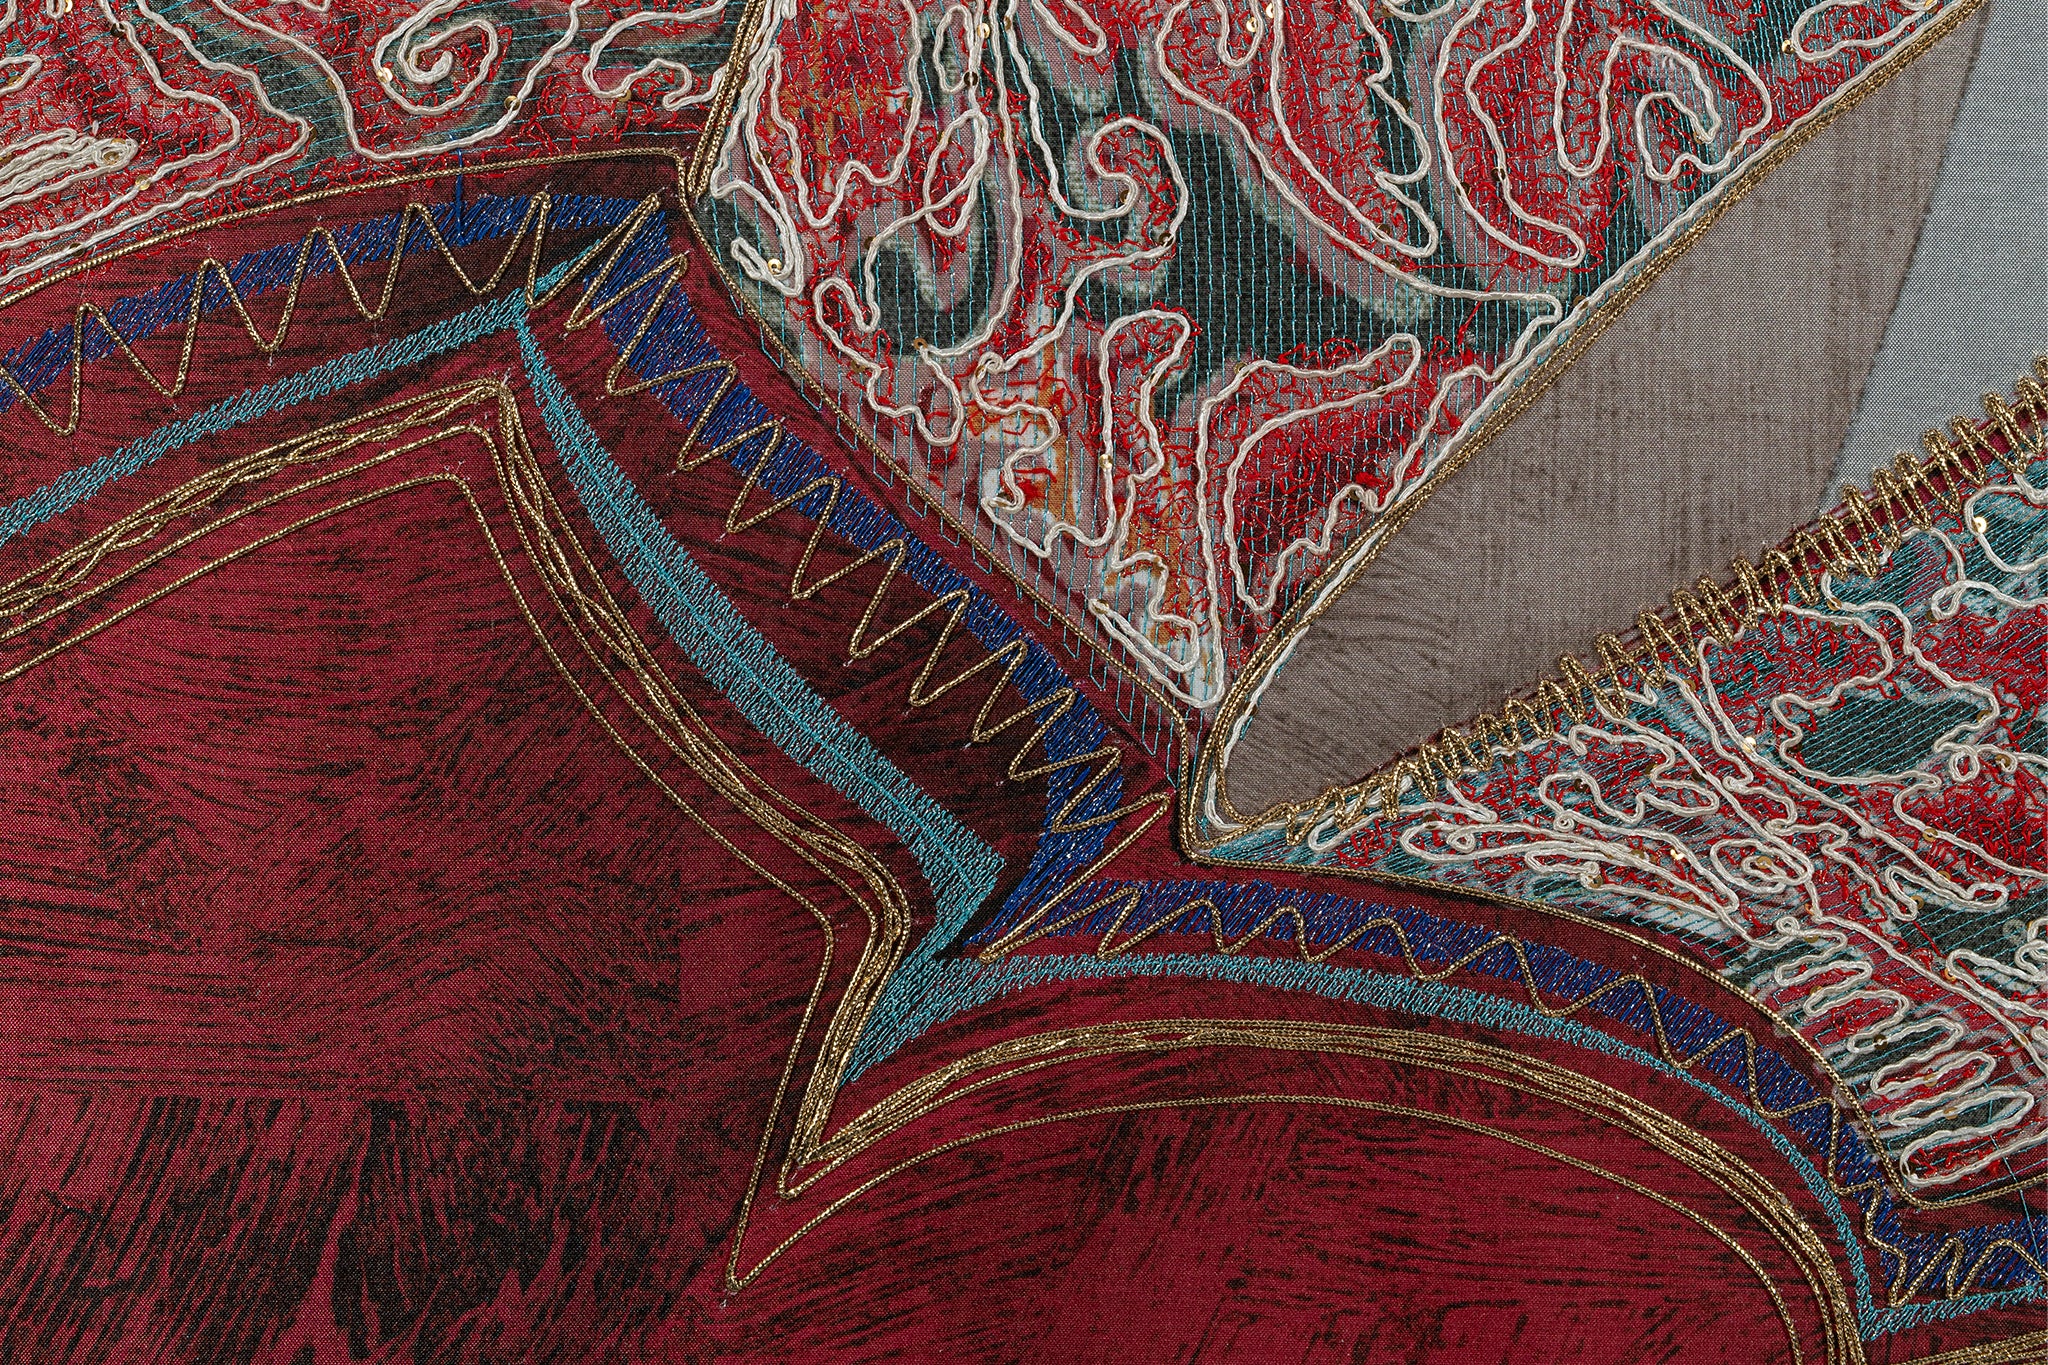 Through the blue, green, and white silk embroidery thread, presenting the artwork details of figure clothing.